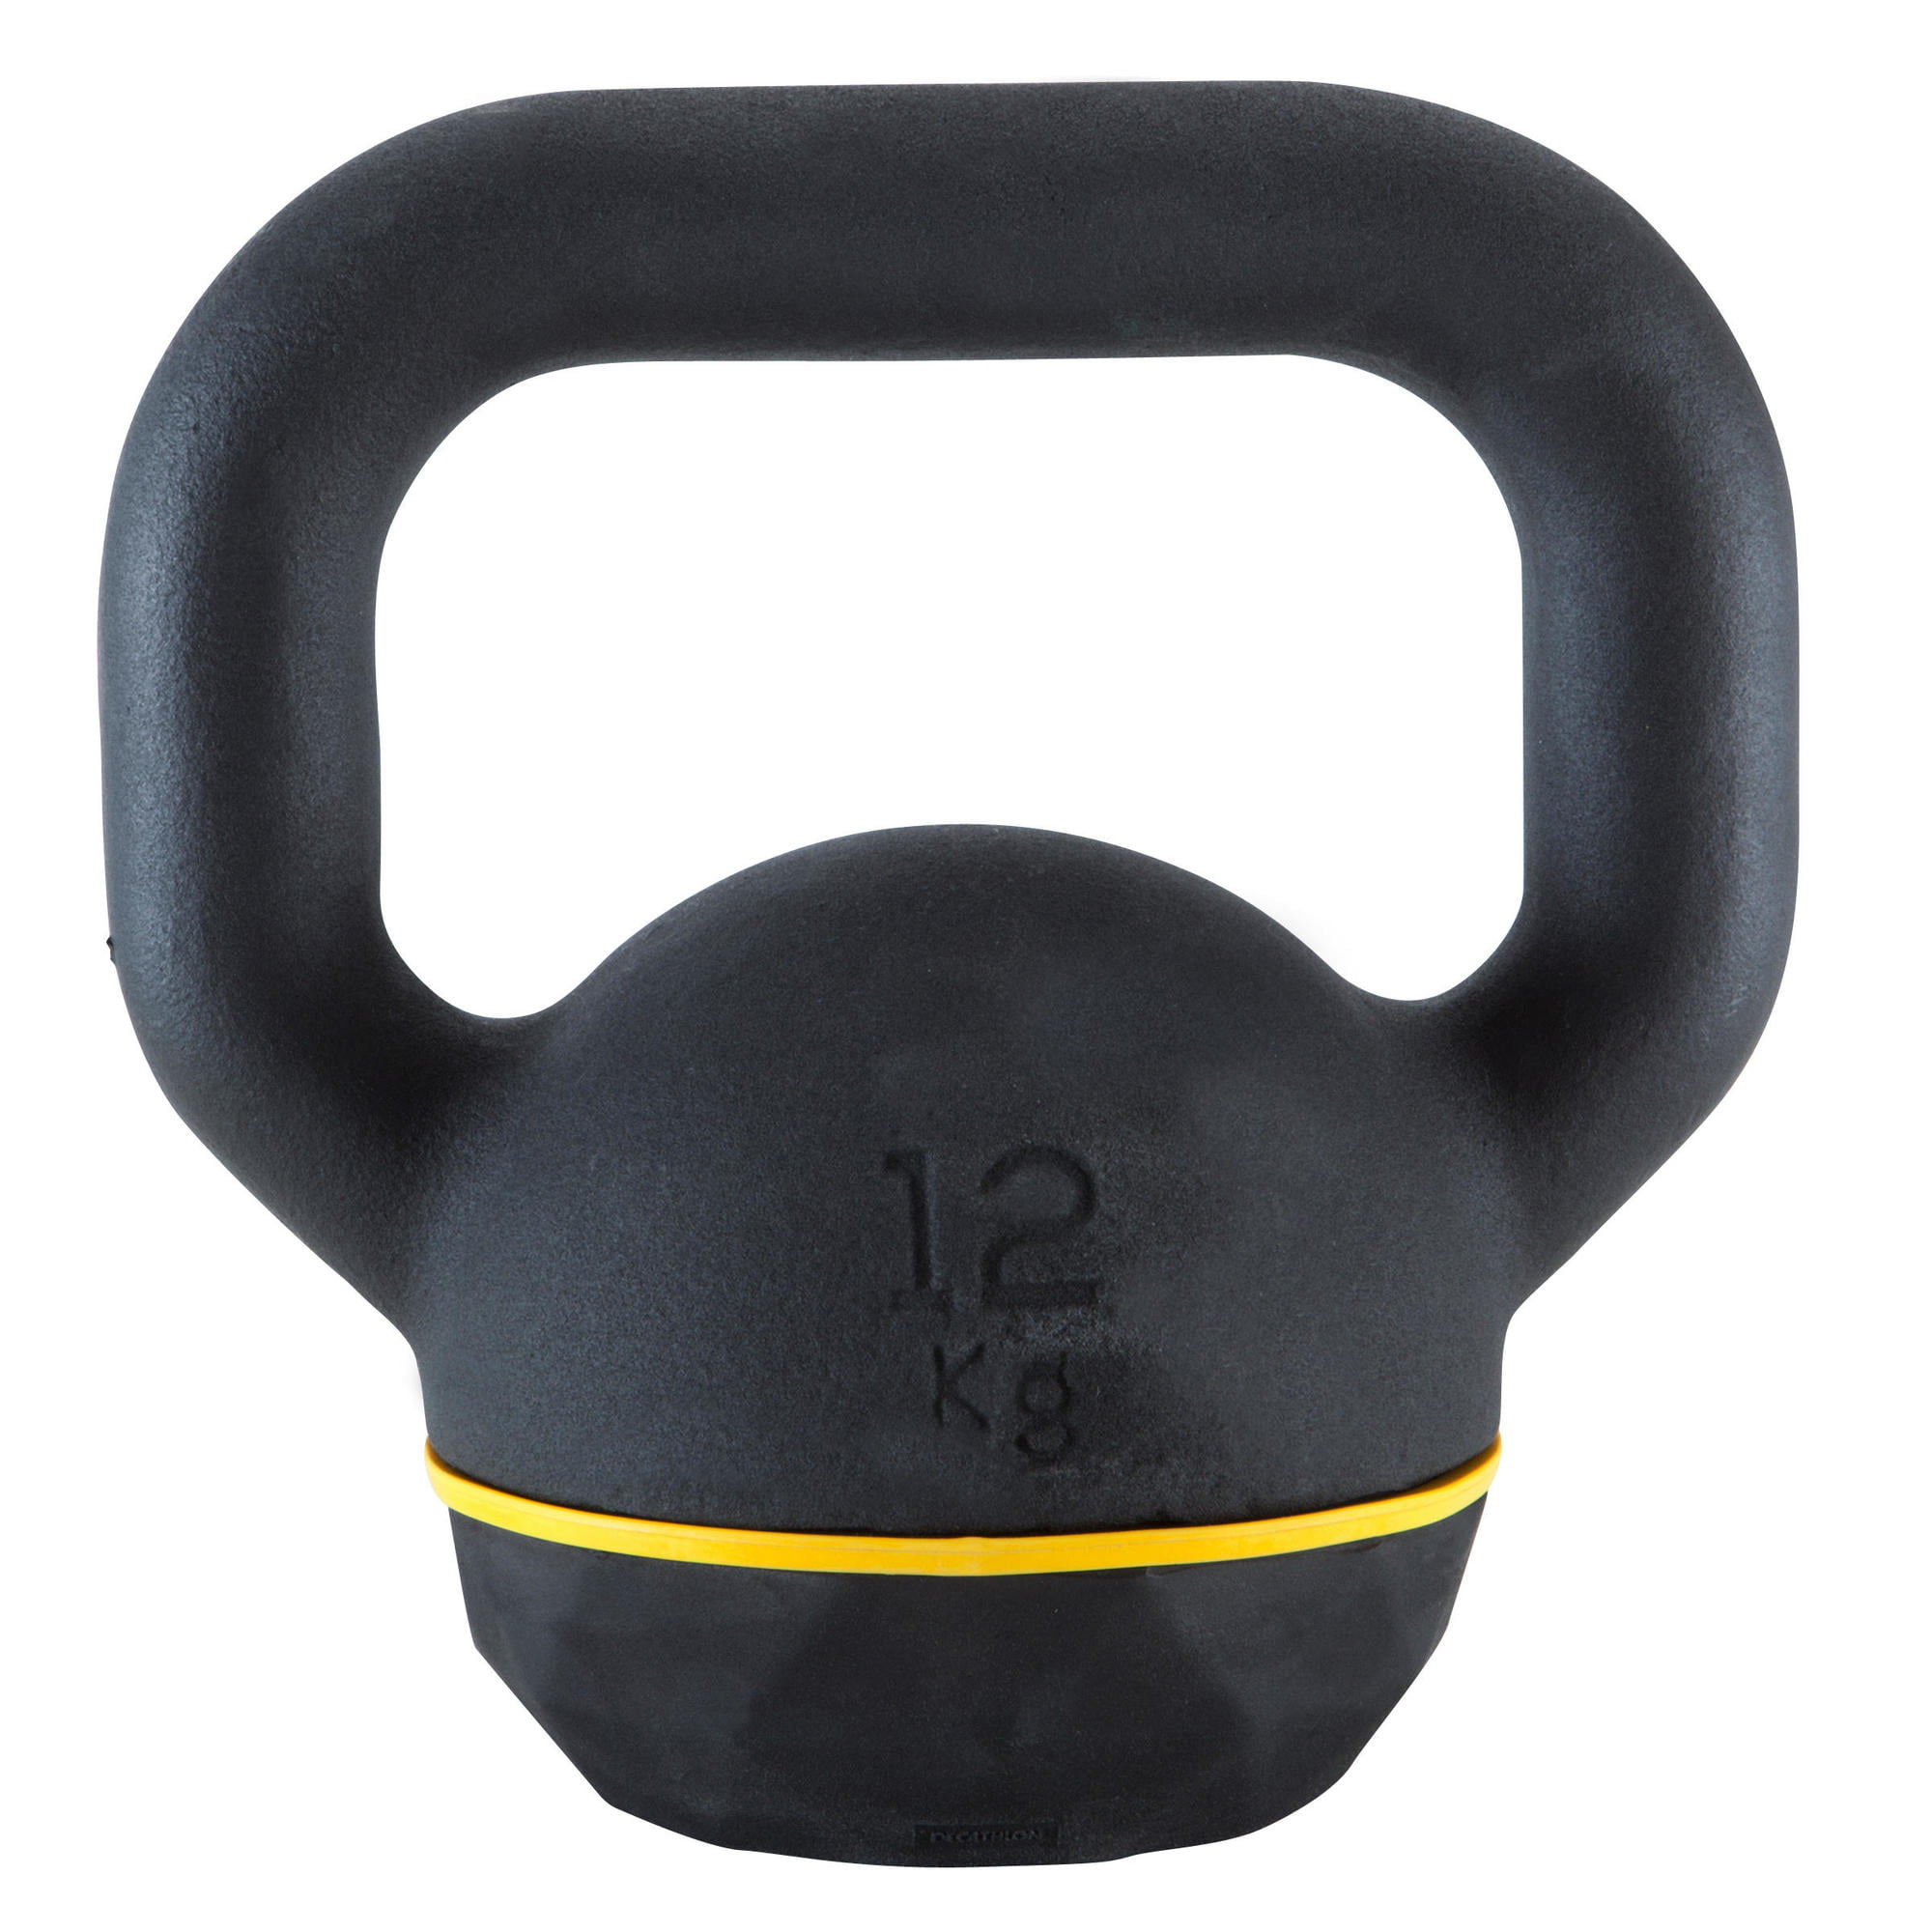 Details about   Cast Iron Kettlebell 5 10 15 20 25 30 35 40 45 50 LBS Weight Lifting Home Gym 